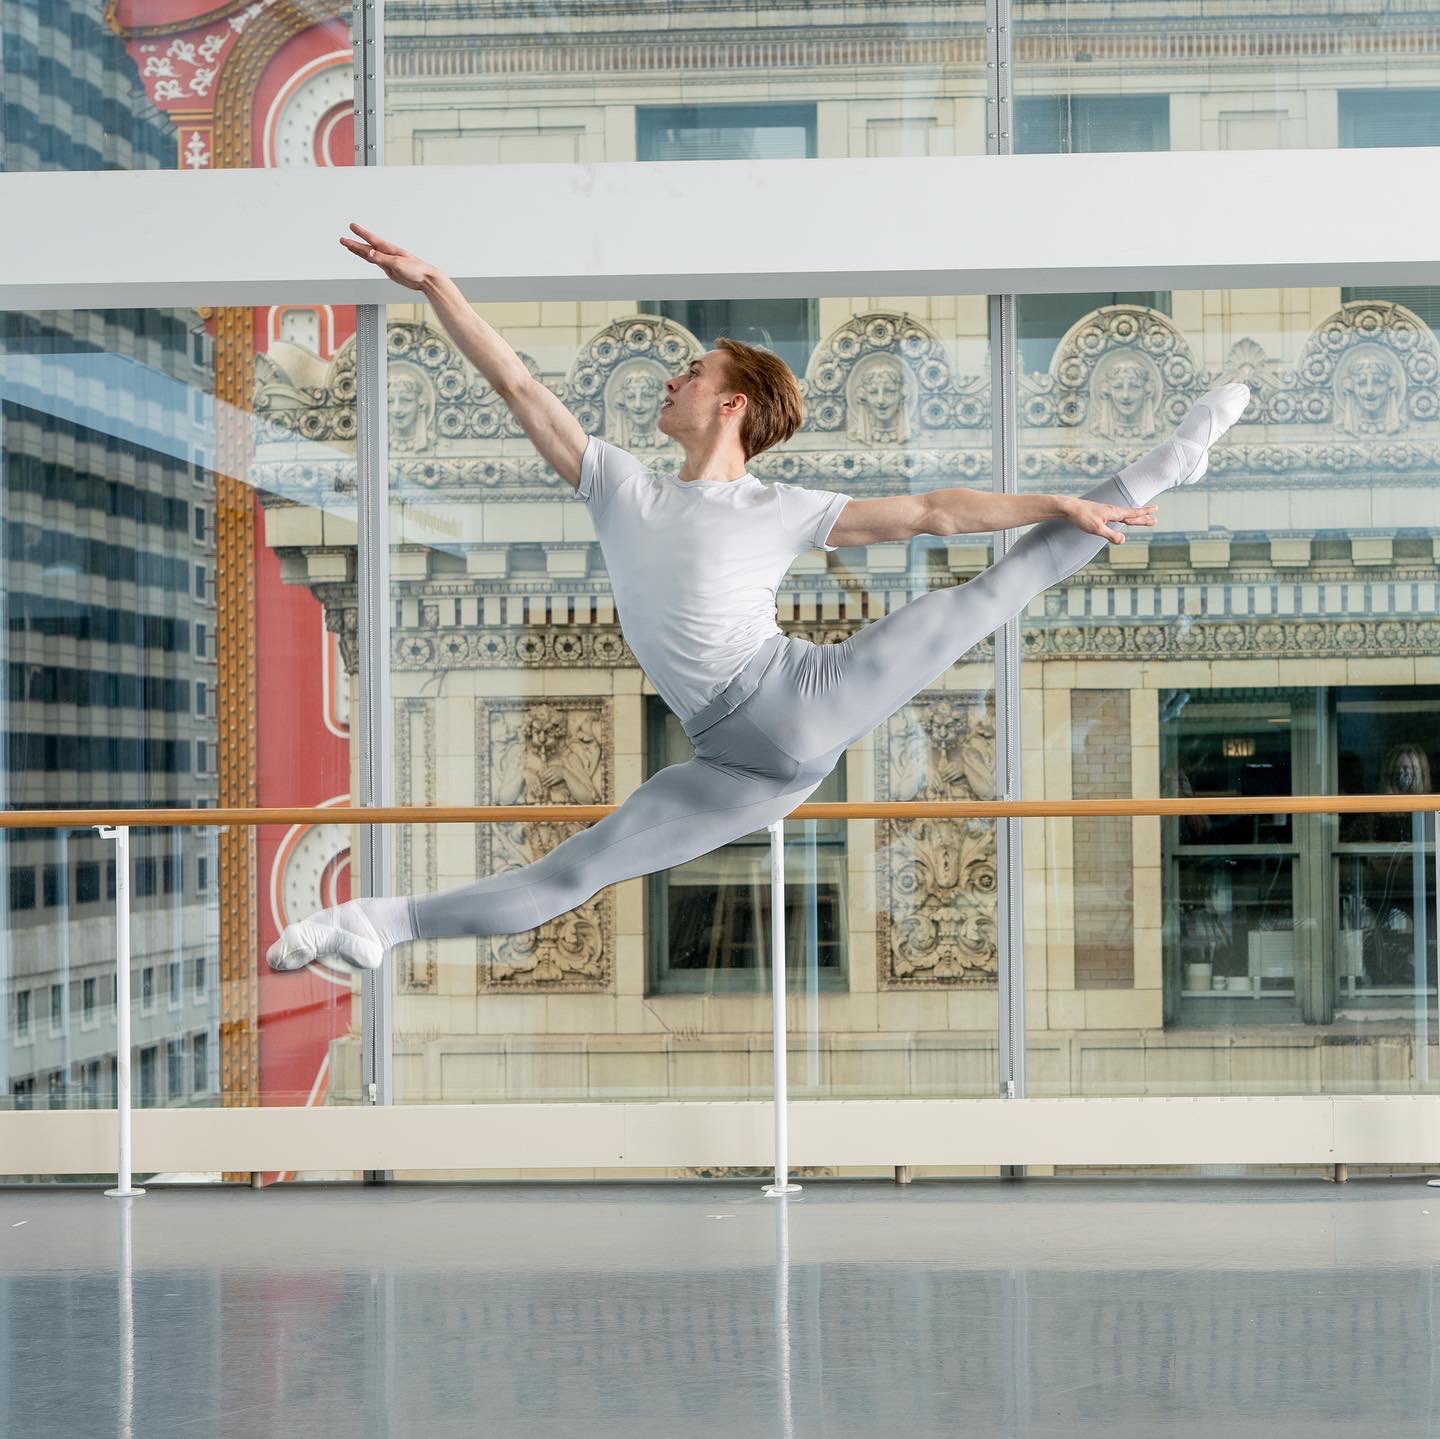 The Joffrey Ballet on Twitter: "Everyone give a warm welcome to our newest  Joffrey Company Artist, Max Dawe! https://t.co/Qs7wuNZEEB" / Twitter